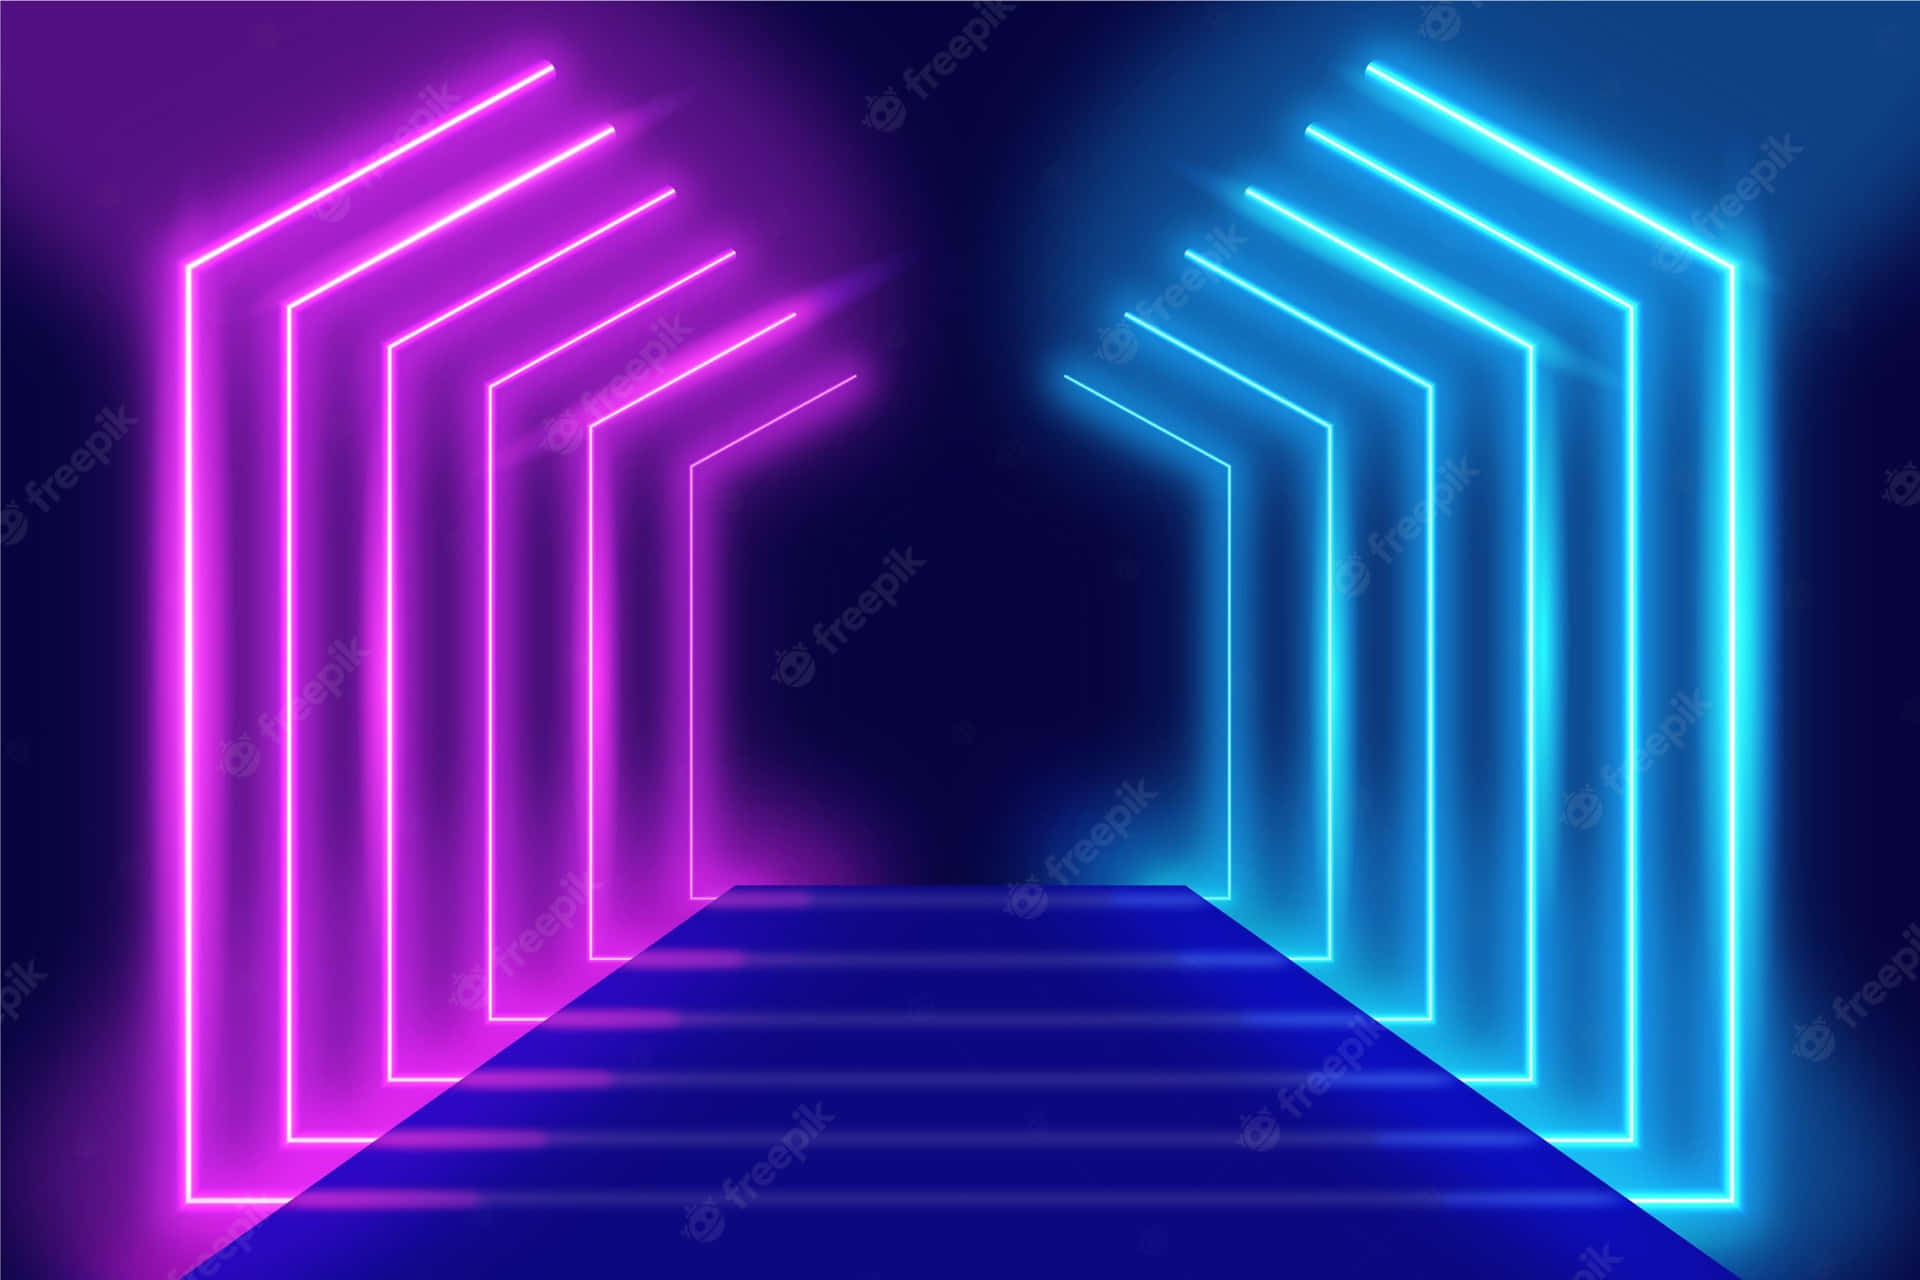 Neon Light Tunnel With Blue And Pink Neon Lights Wallpaper